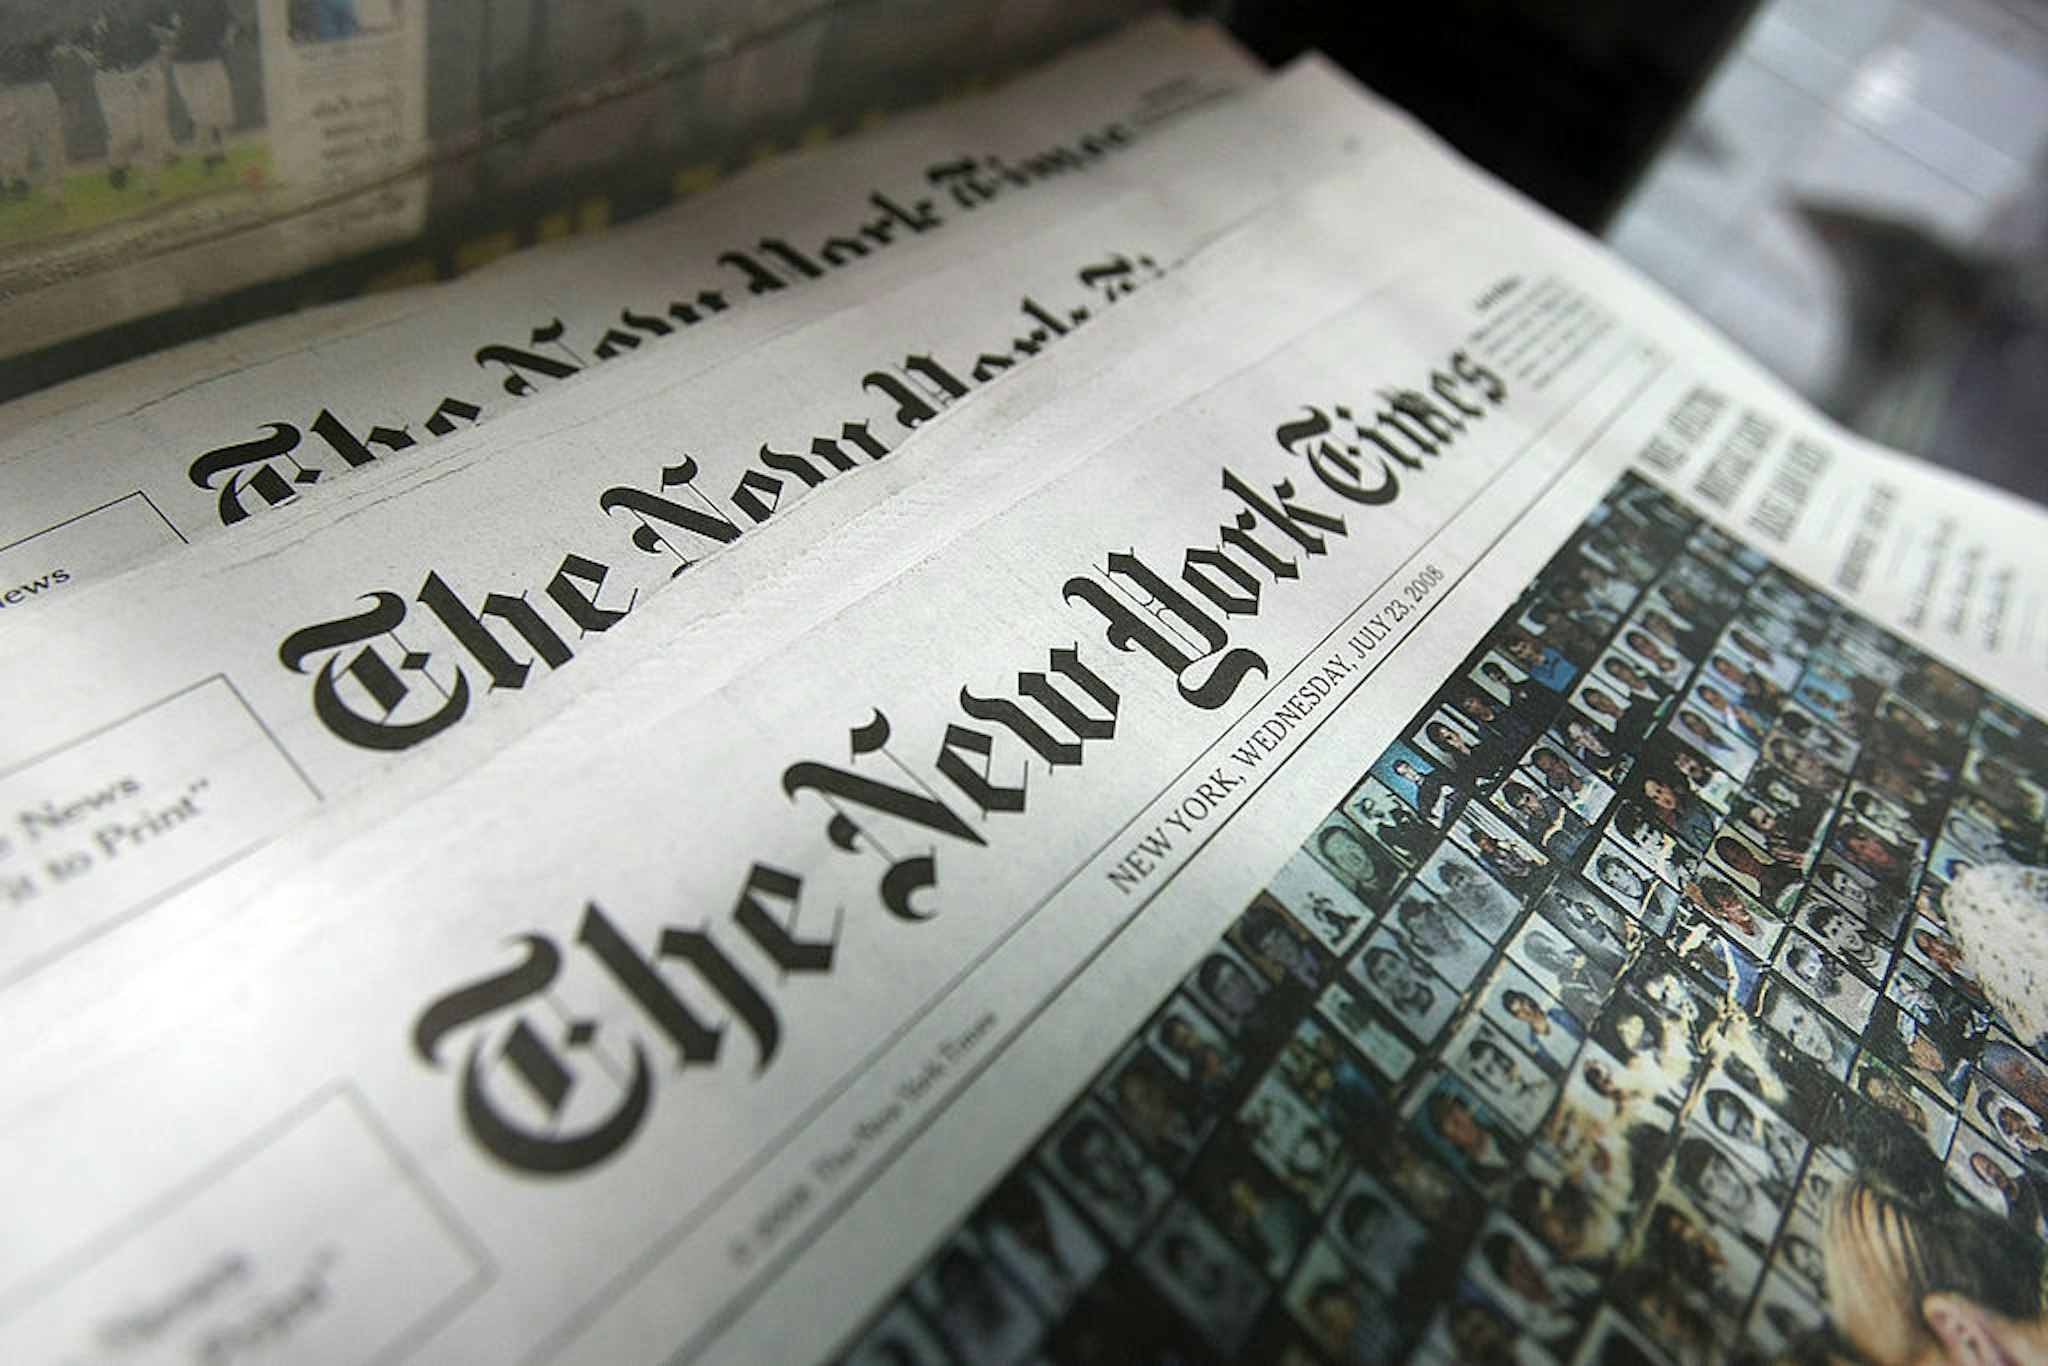 Copies of the New York Times sit for sale in a rack July 23, 2008 in New York City.